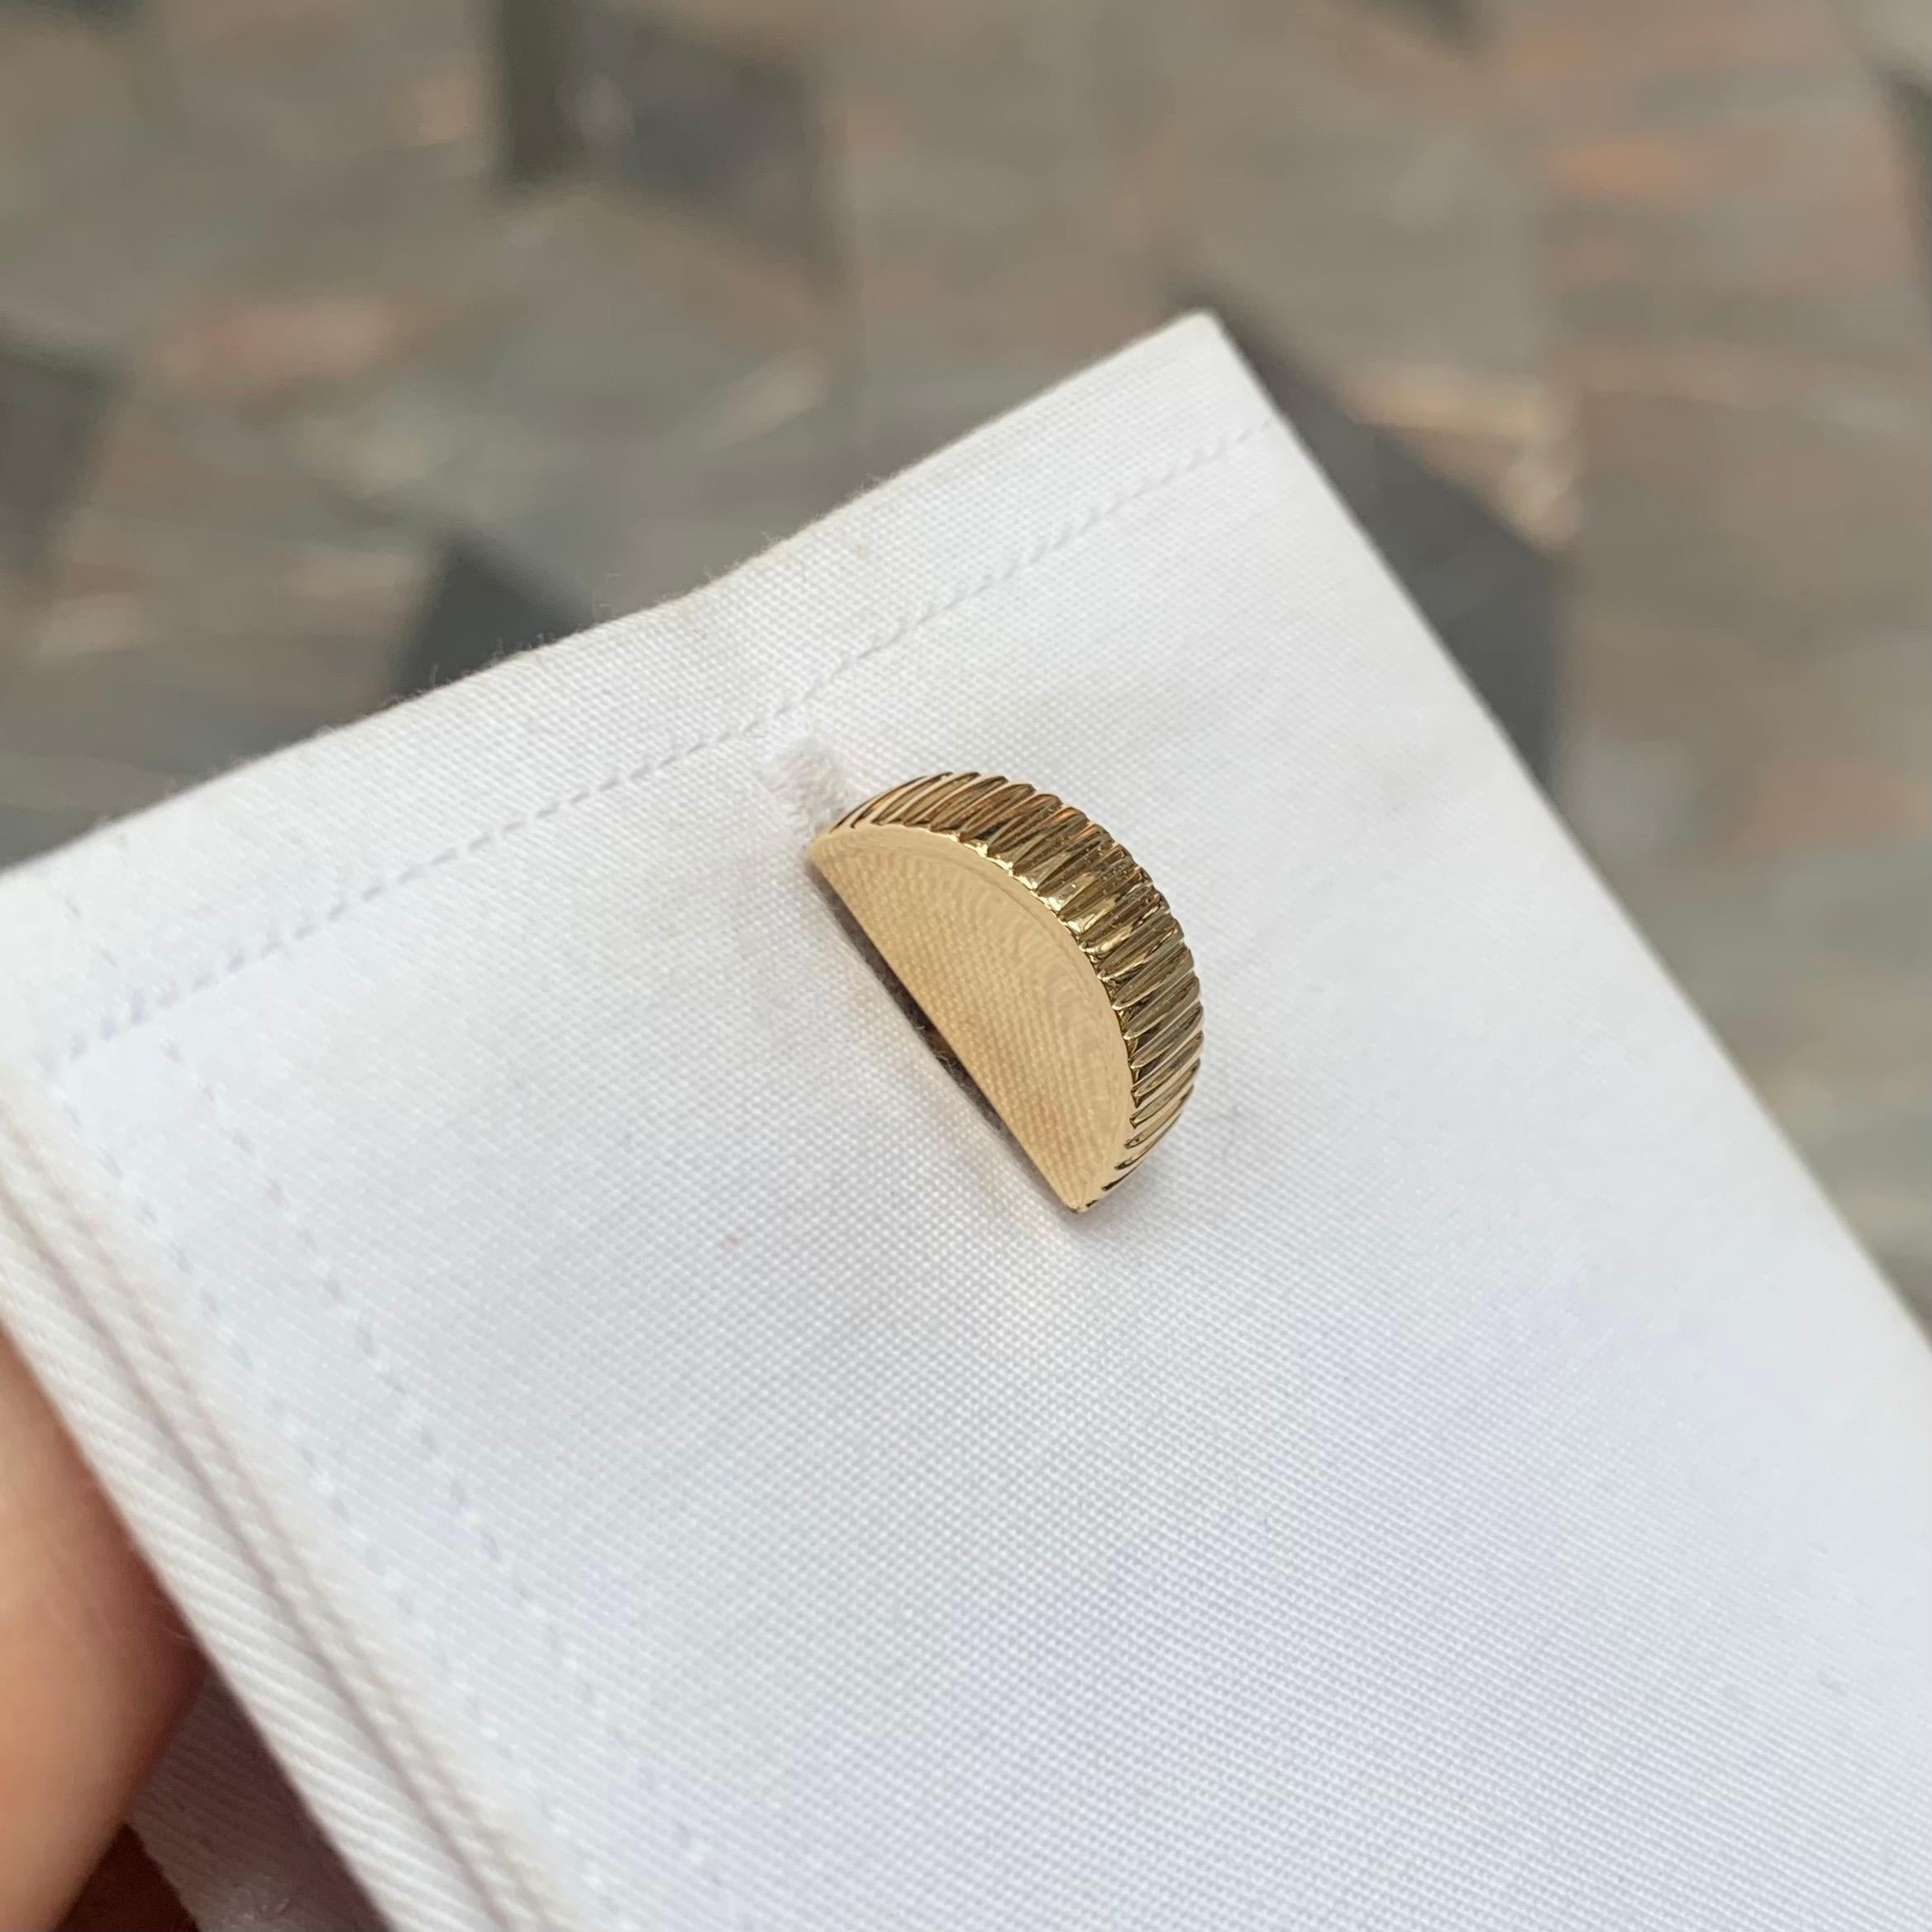 Vintage Tiffany & Co. Retro Cufflinks in Solid 18k Yellow Gold 2